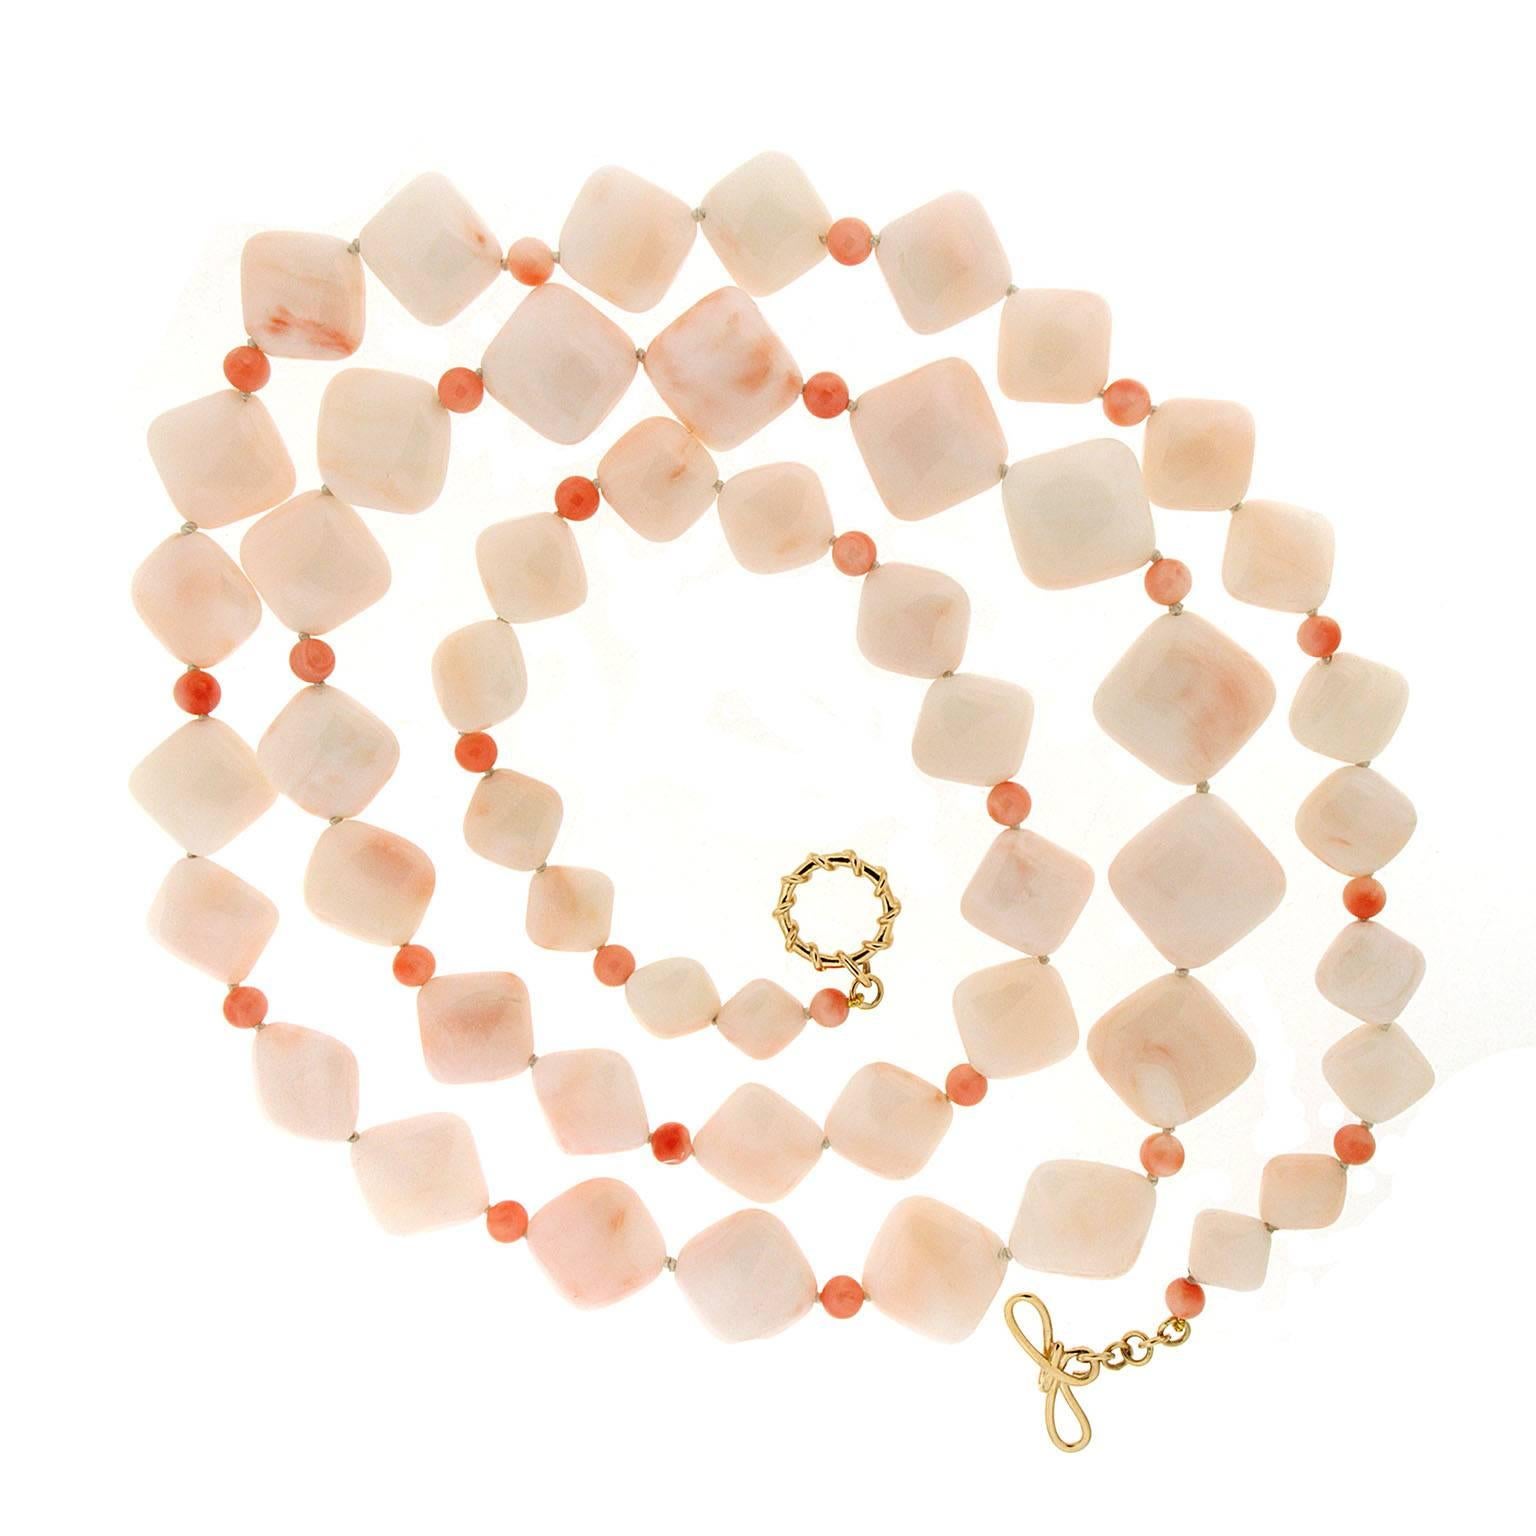 Ivory and blush hues give this necklace an elegant quality. The focus is carved cushion-shaped coral, ranging from soft to faint pink, evoking the cut of chiclets. Strung on their sides as a rhombus, the coral is arranged to graduate smaller towards